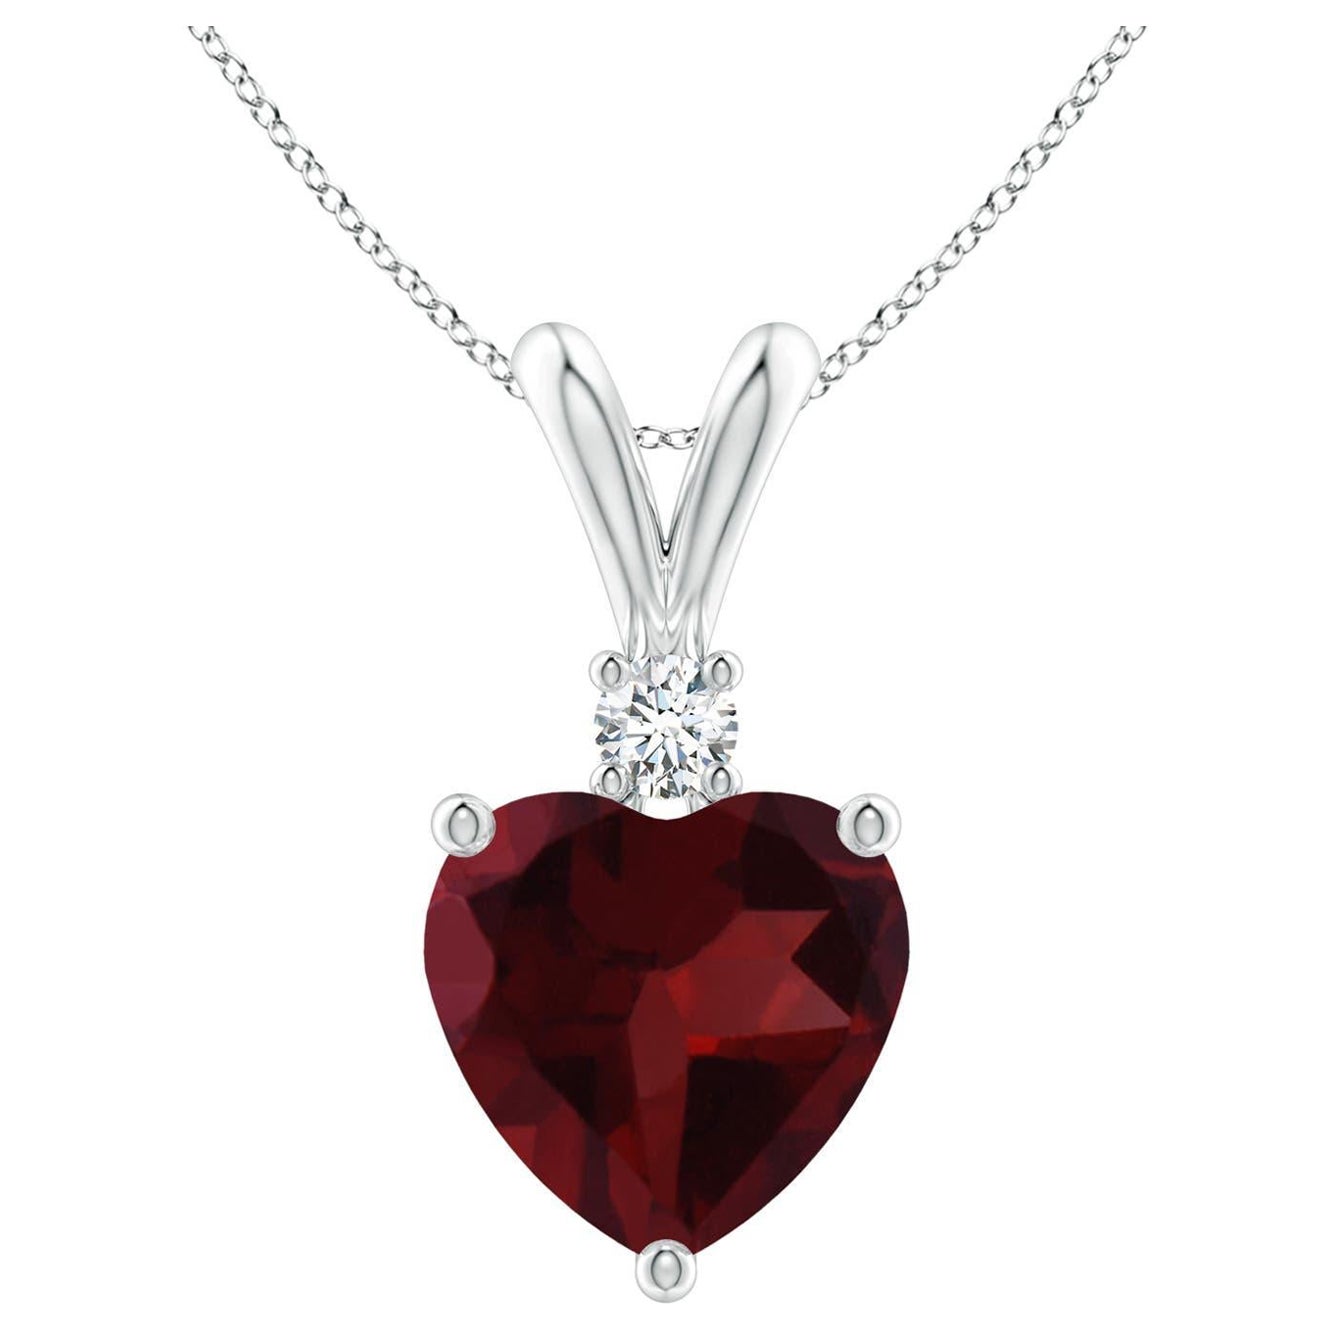 Natural Heart-Shaped 1.85ct Garnet Pendant with Diamond in 14ct White Gold